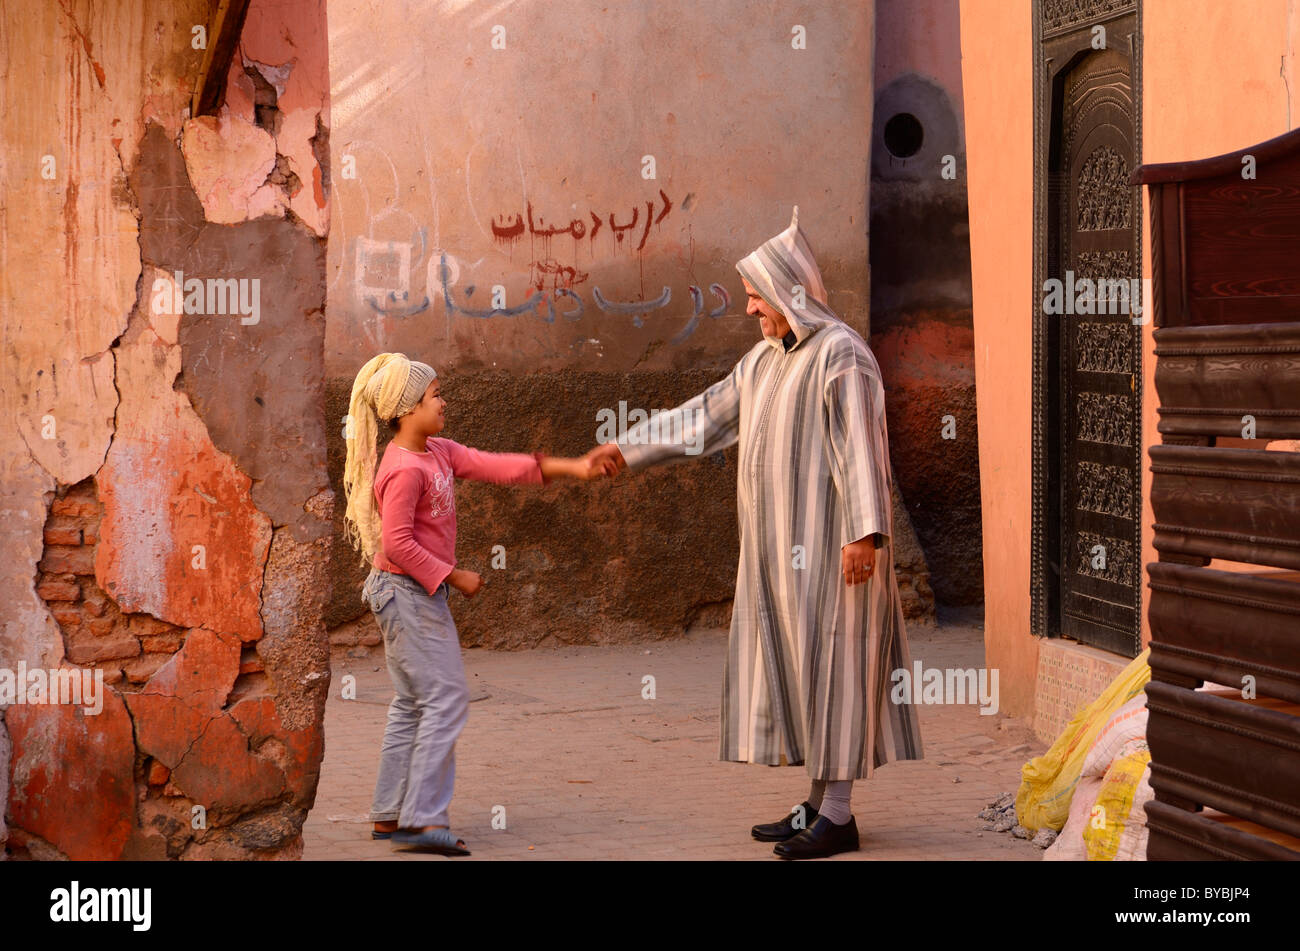 Moroccan man in djellaba greeting a young girl with headscarf in souk of Marrakech Stock Photo